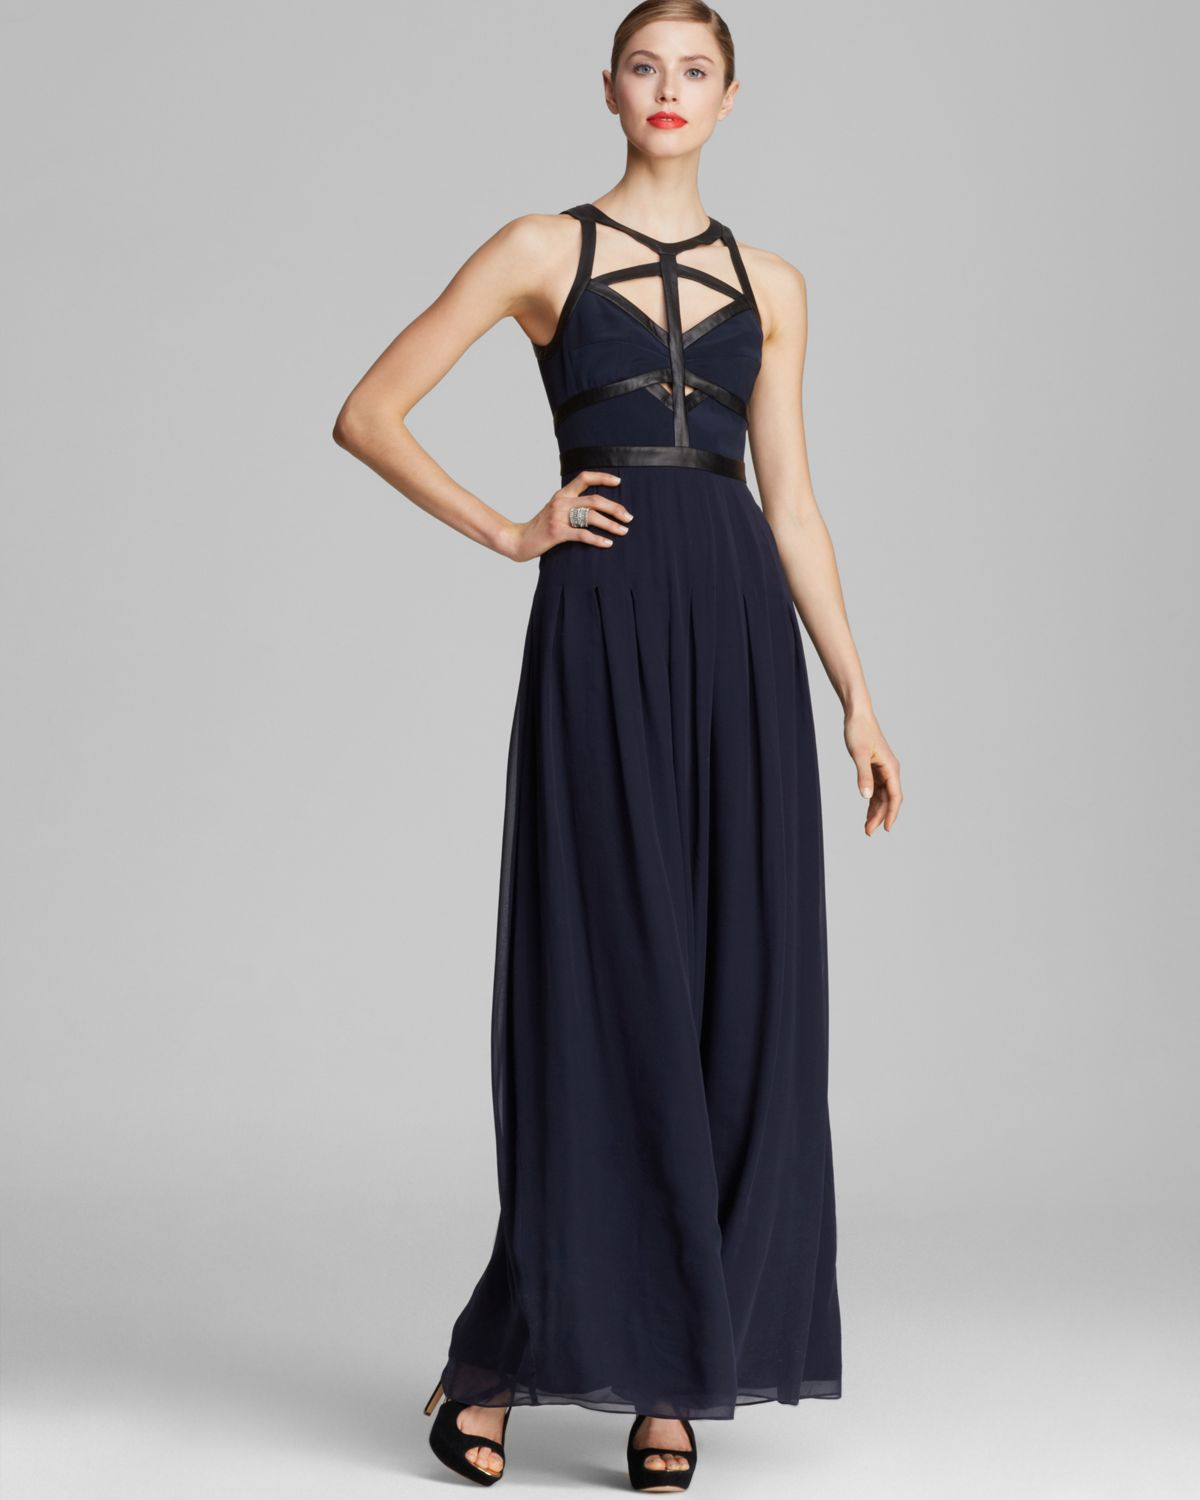 Lyst - Rebecca taylor Gown Sleeveless Leather Caged in Blue